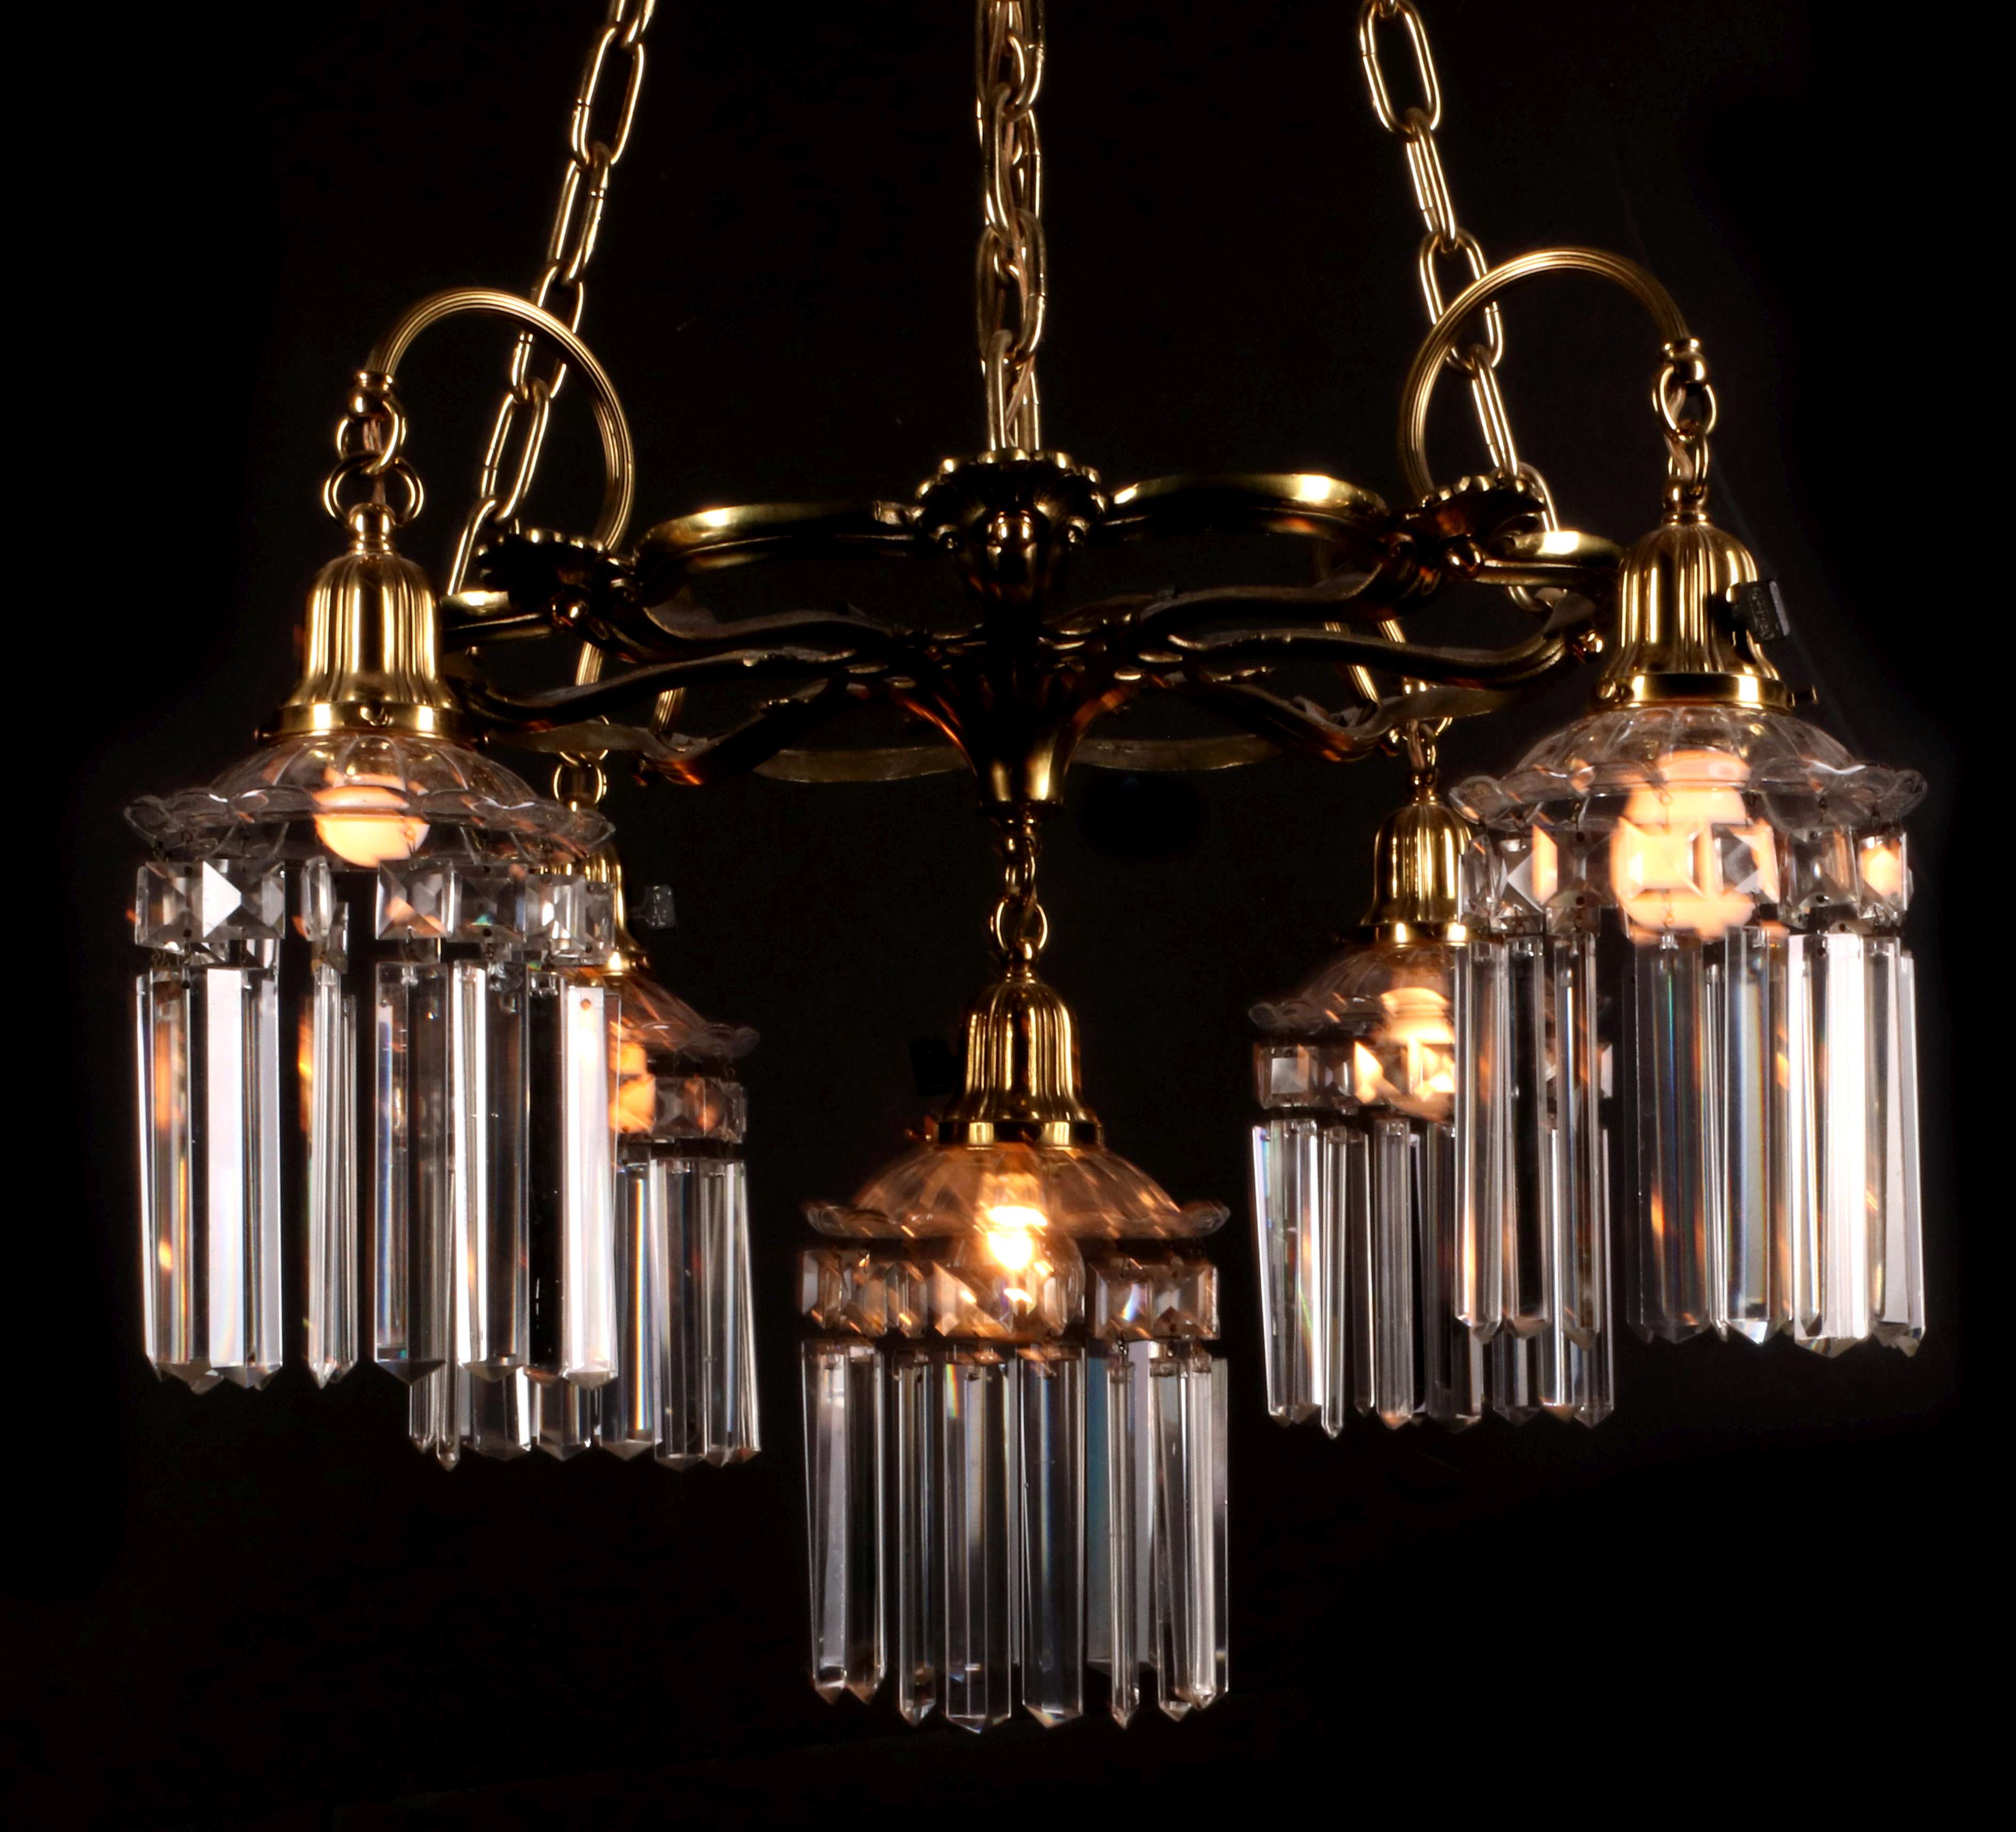 AN EARLY 20TH C BRASS CHANDELIER DRESSED IN PRISMS